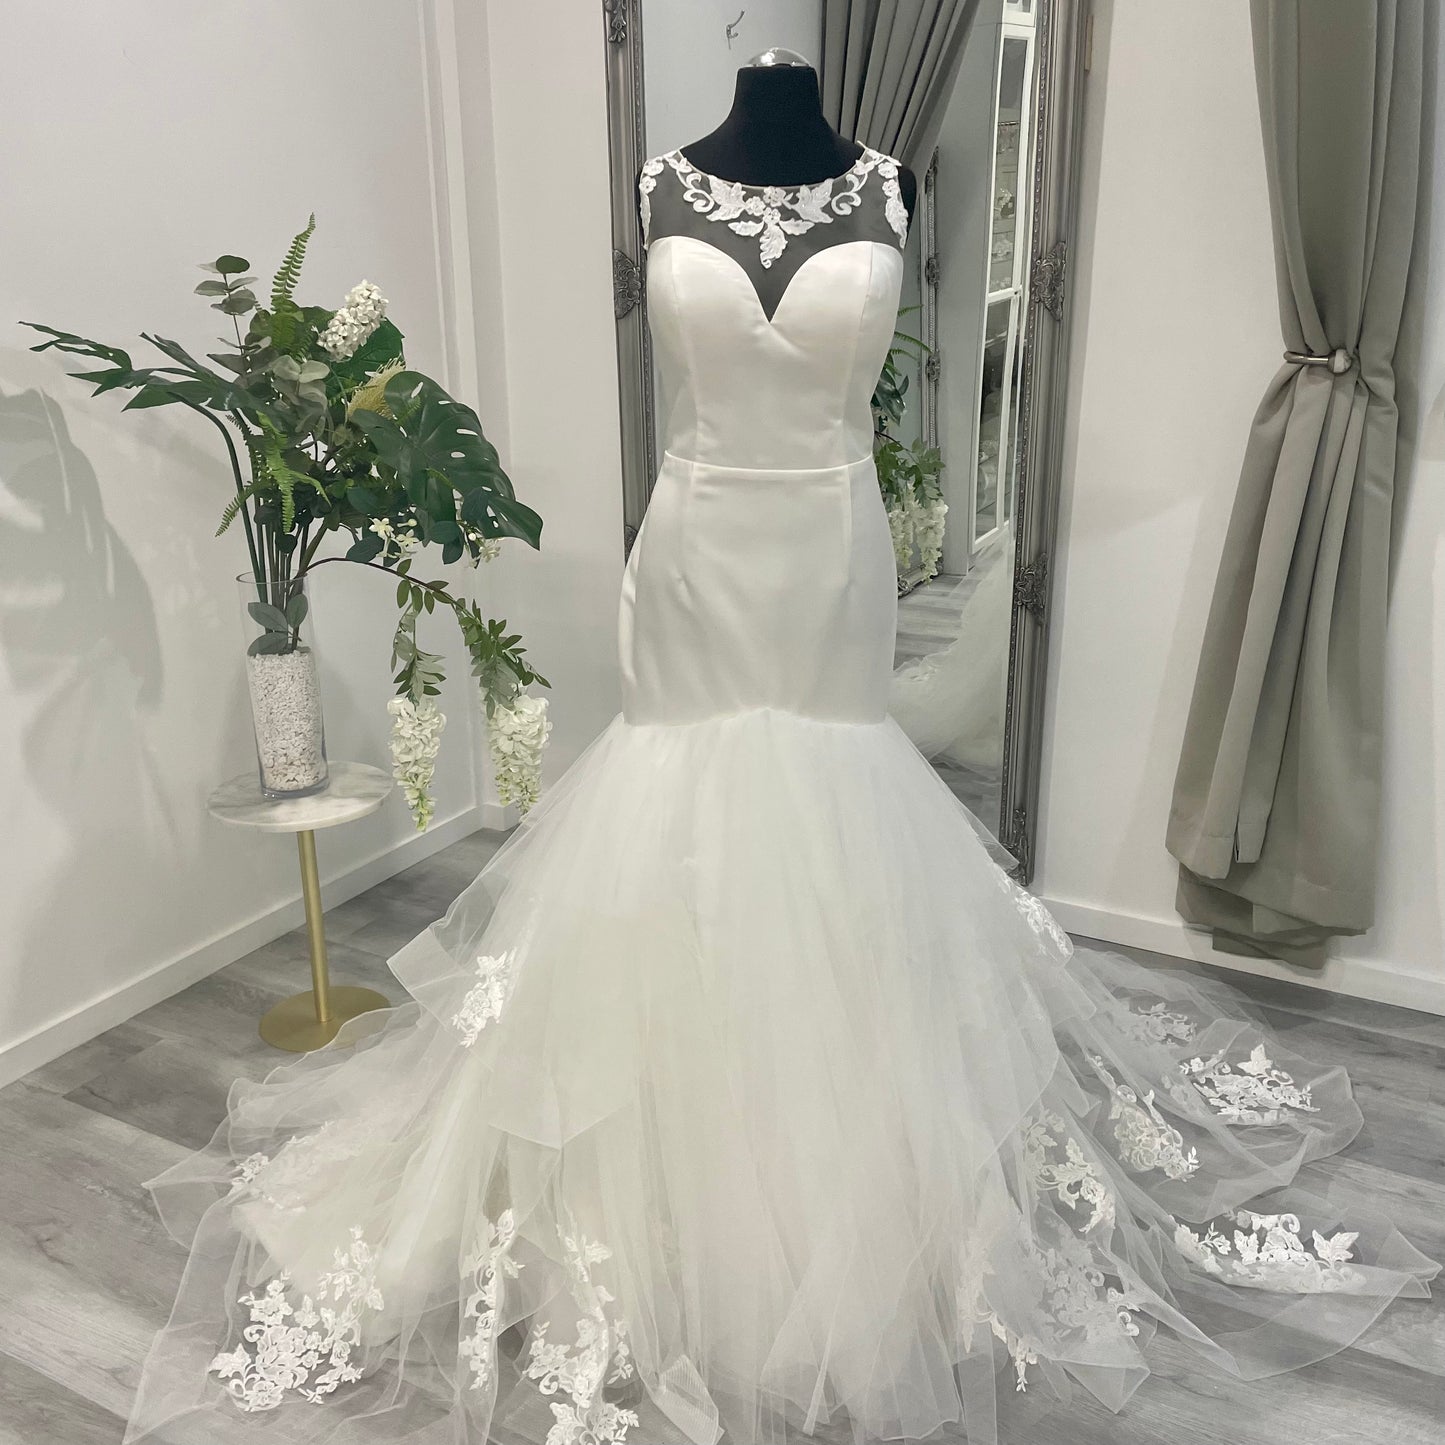 Chic Iris Trumpet bridal gown with intricate lace detailing and a flowing mermaid silhouette on display at Divine Bridal.